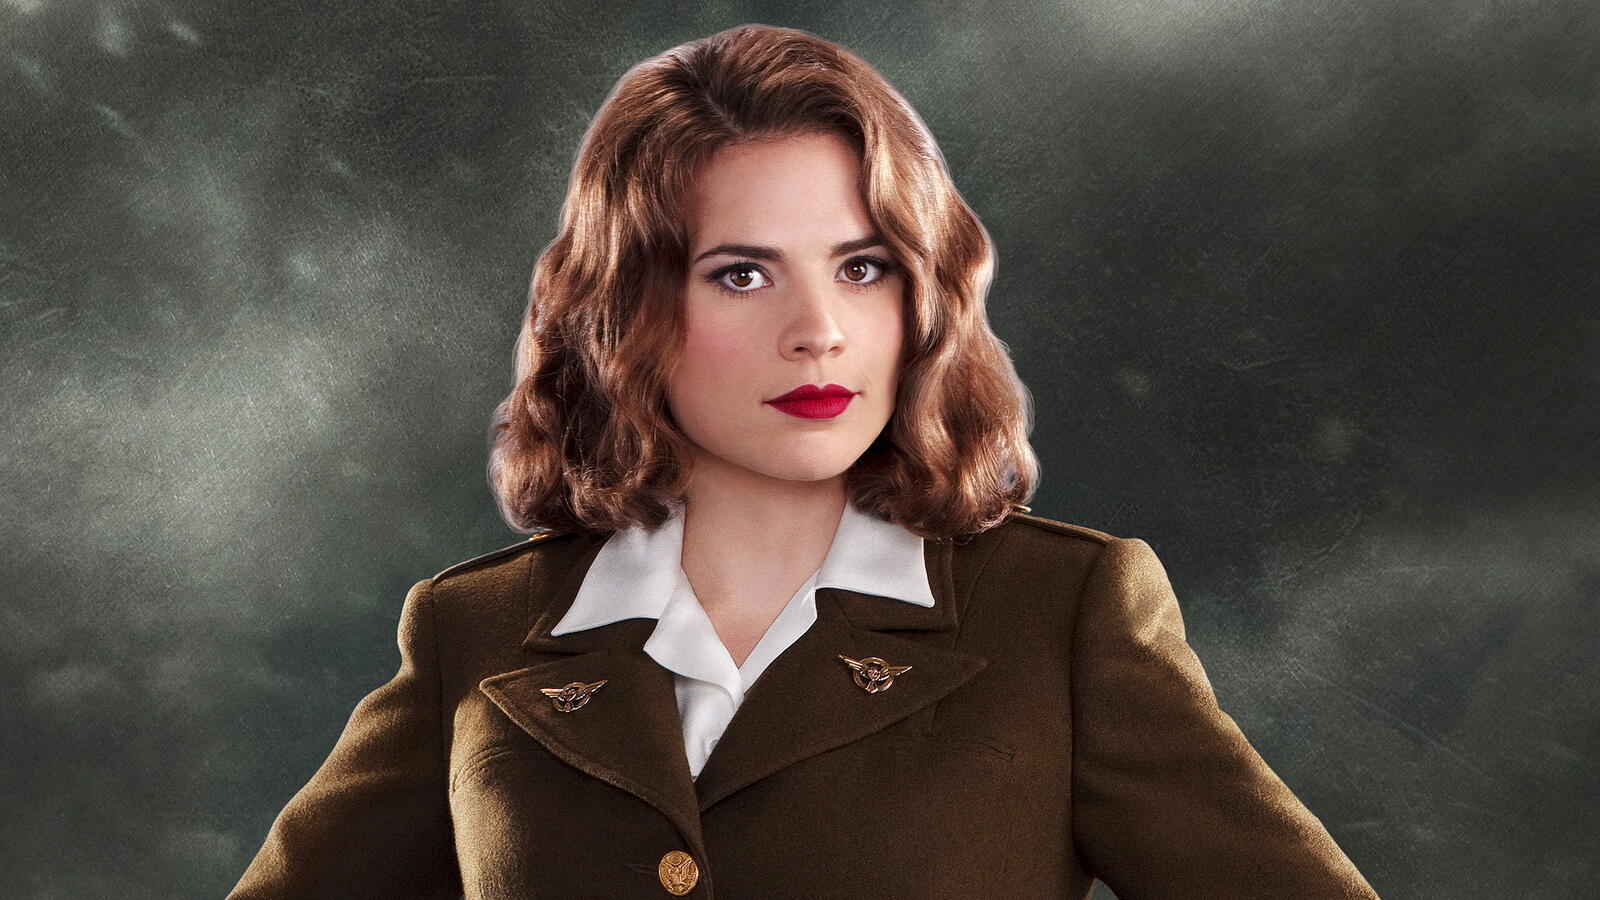 Free photo Portrait of actress Hayley Atwell on a dark background